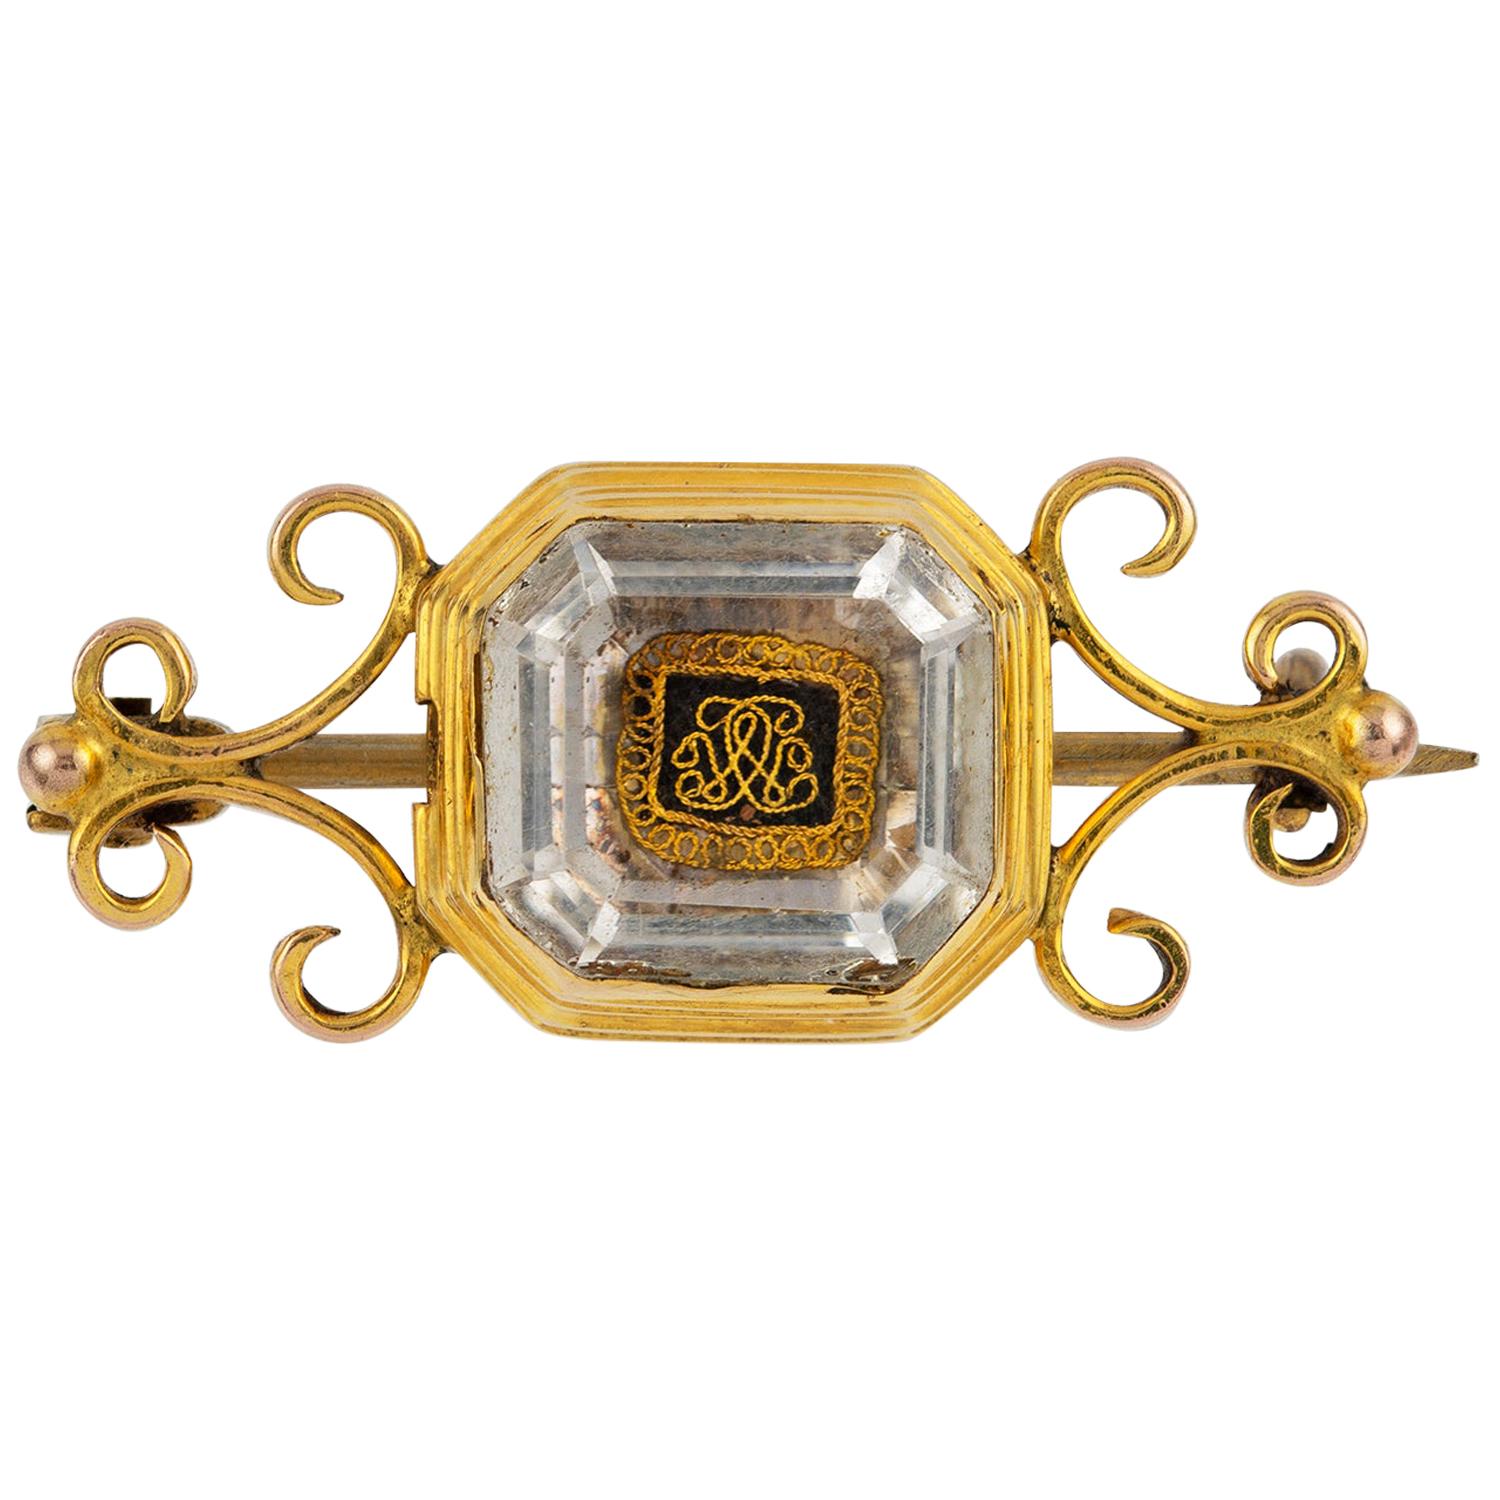 Stuart Crystal and Gold Brooch